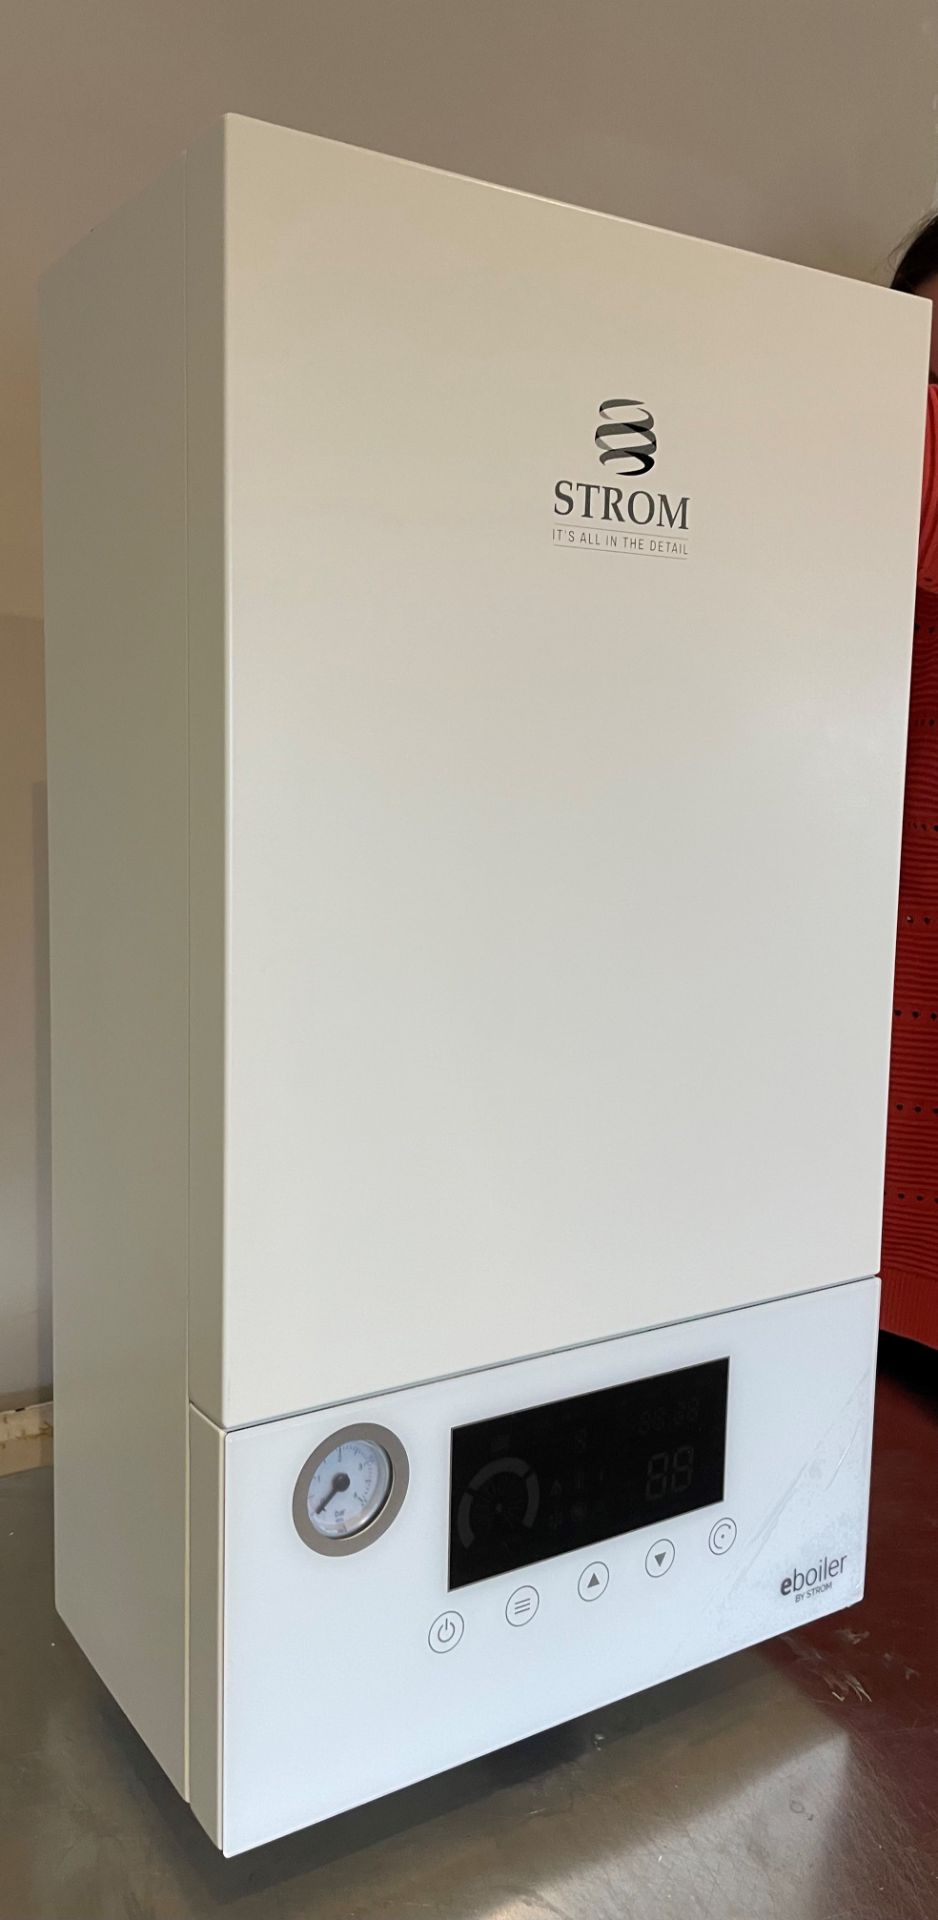 New Strom SBTP24S 3-Phase Electric System Boiler Compact and stylish boiler with quiet operation and - Bild 6 aus 13